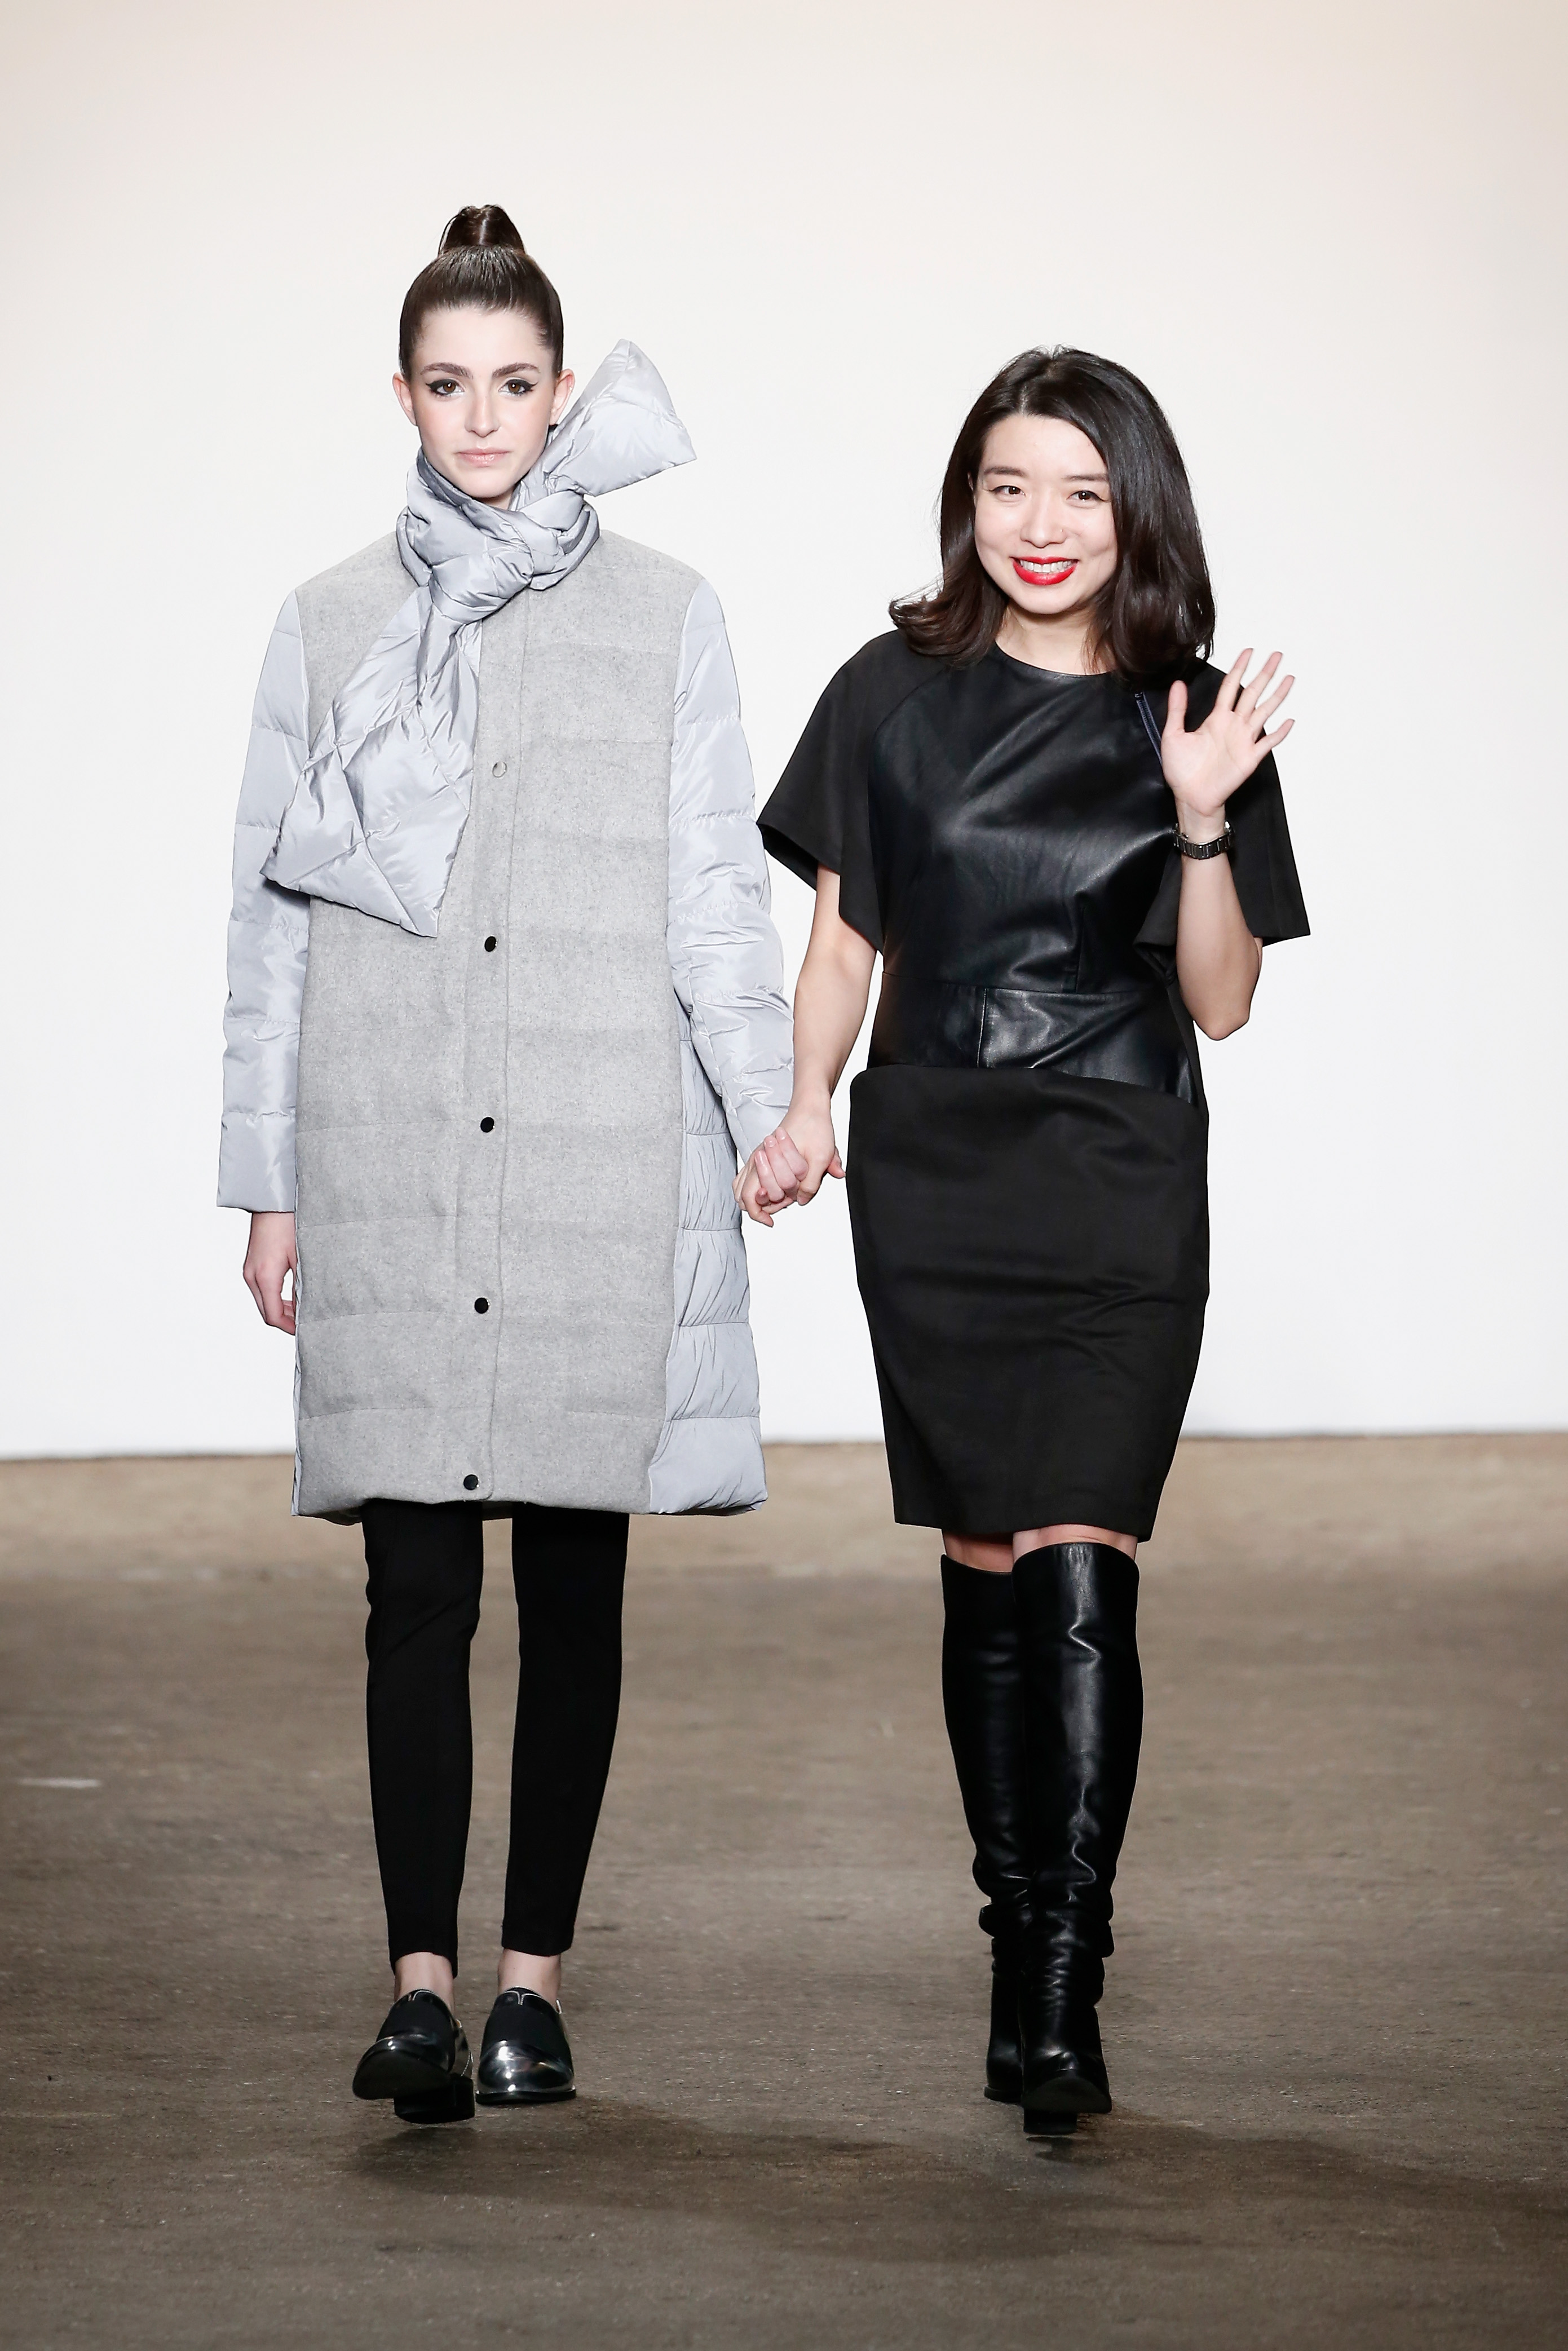 NEW YORK, NY - FEBRUARY 15: Designer Eva Yiwei Xu (R) walks the runway with a model wearing All Comes From Nothing at Nolcha Shows During New York Fashion Week Women's Fall/Winter 2016 Presented By Neogrid at ArtBeam on February 15, 2016 in New York City. (Photo by Brian Ach/Getty Images For Nolcha) *** Local Caption *** Eva Yiwei Xu